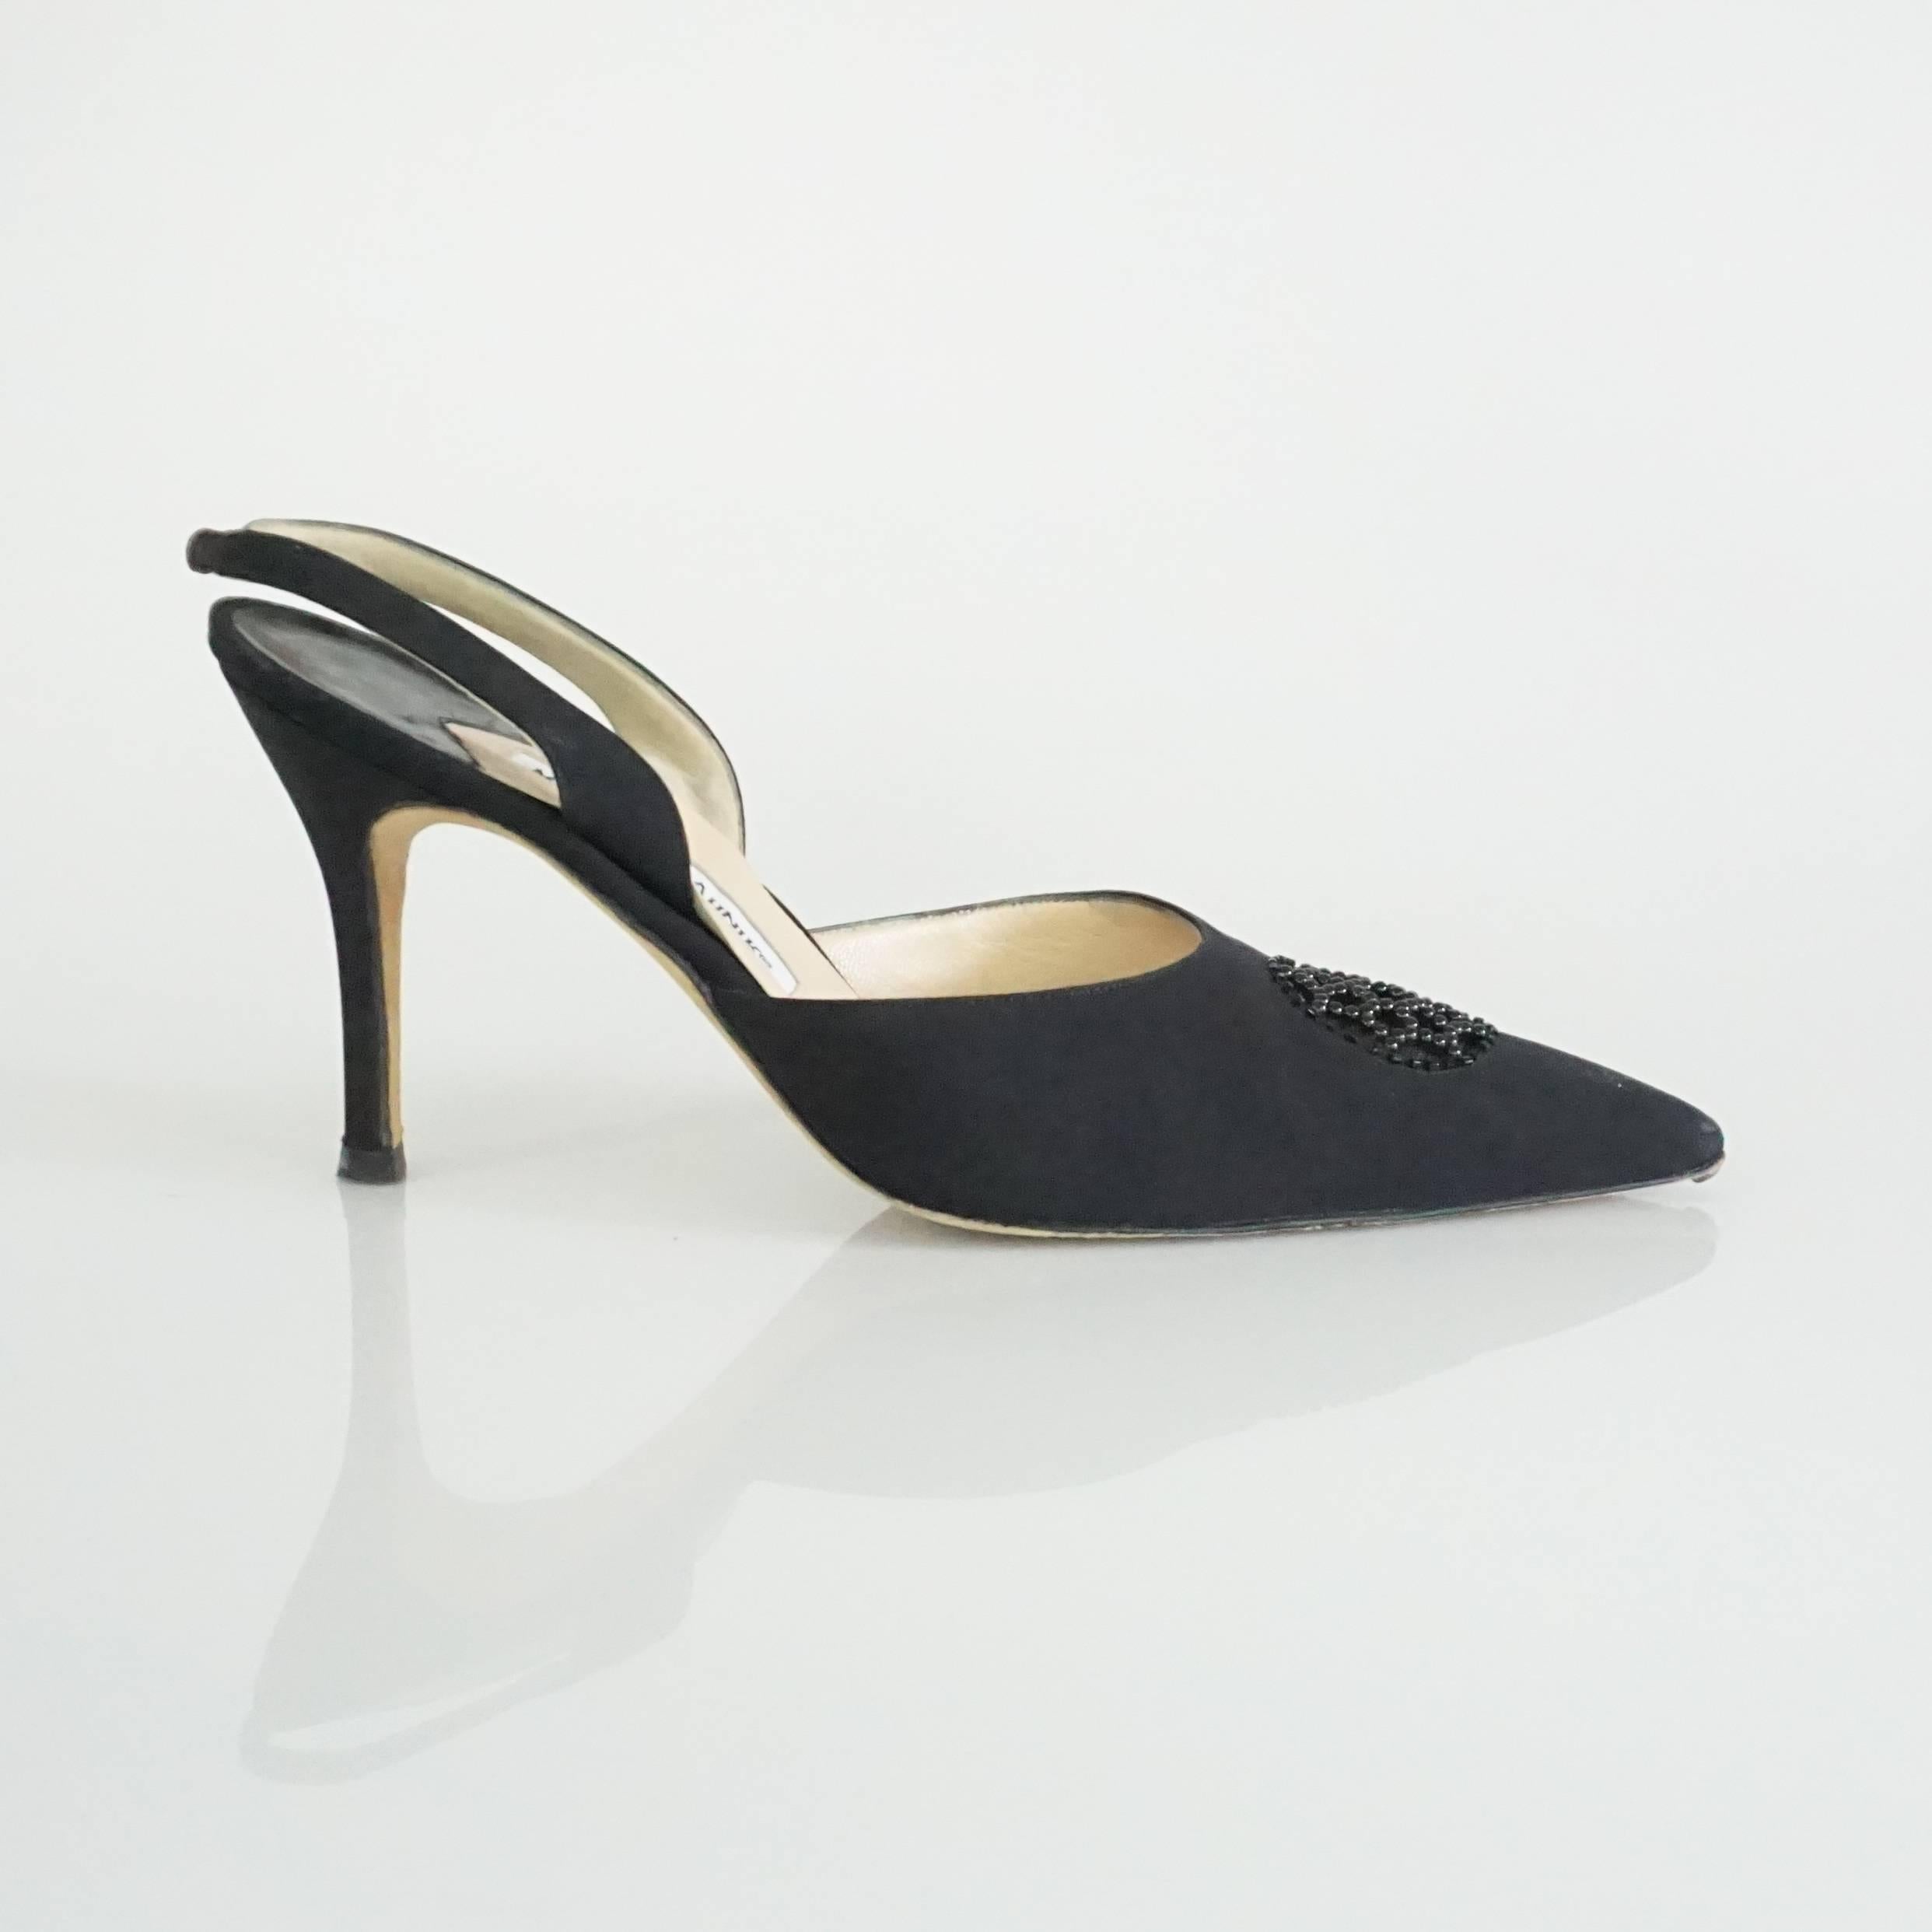 Manolo Blahnik Black Beaded Carolyne Heel - 39.5. These Manolo Blahnik black fabric heels have a mesh beaded front and a slingback strap. They are in good condition with some wear at the front of the toe on the bottom sole, and very faint wear to